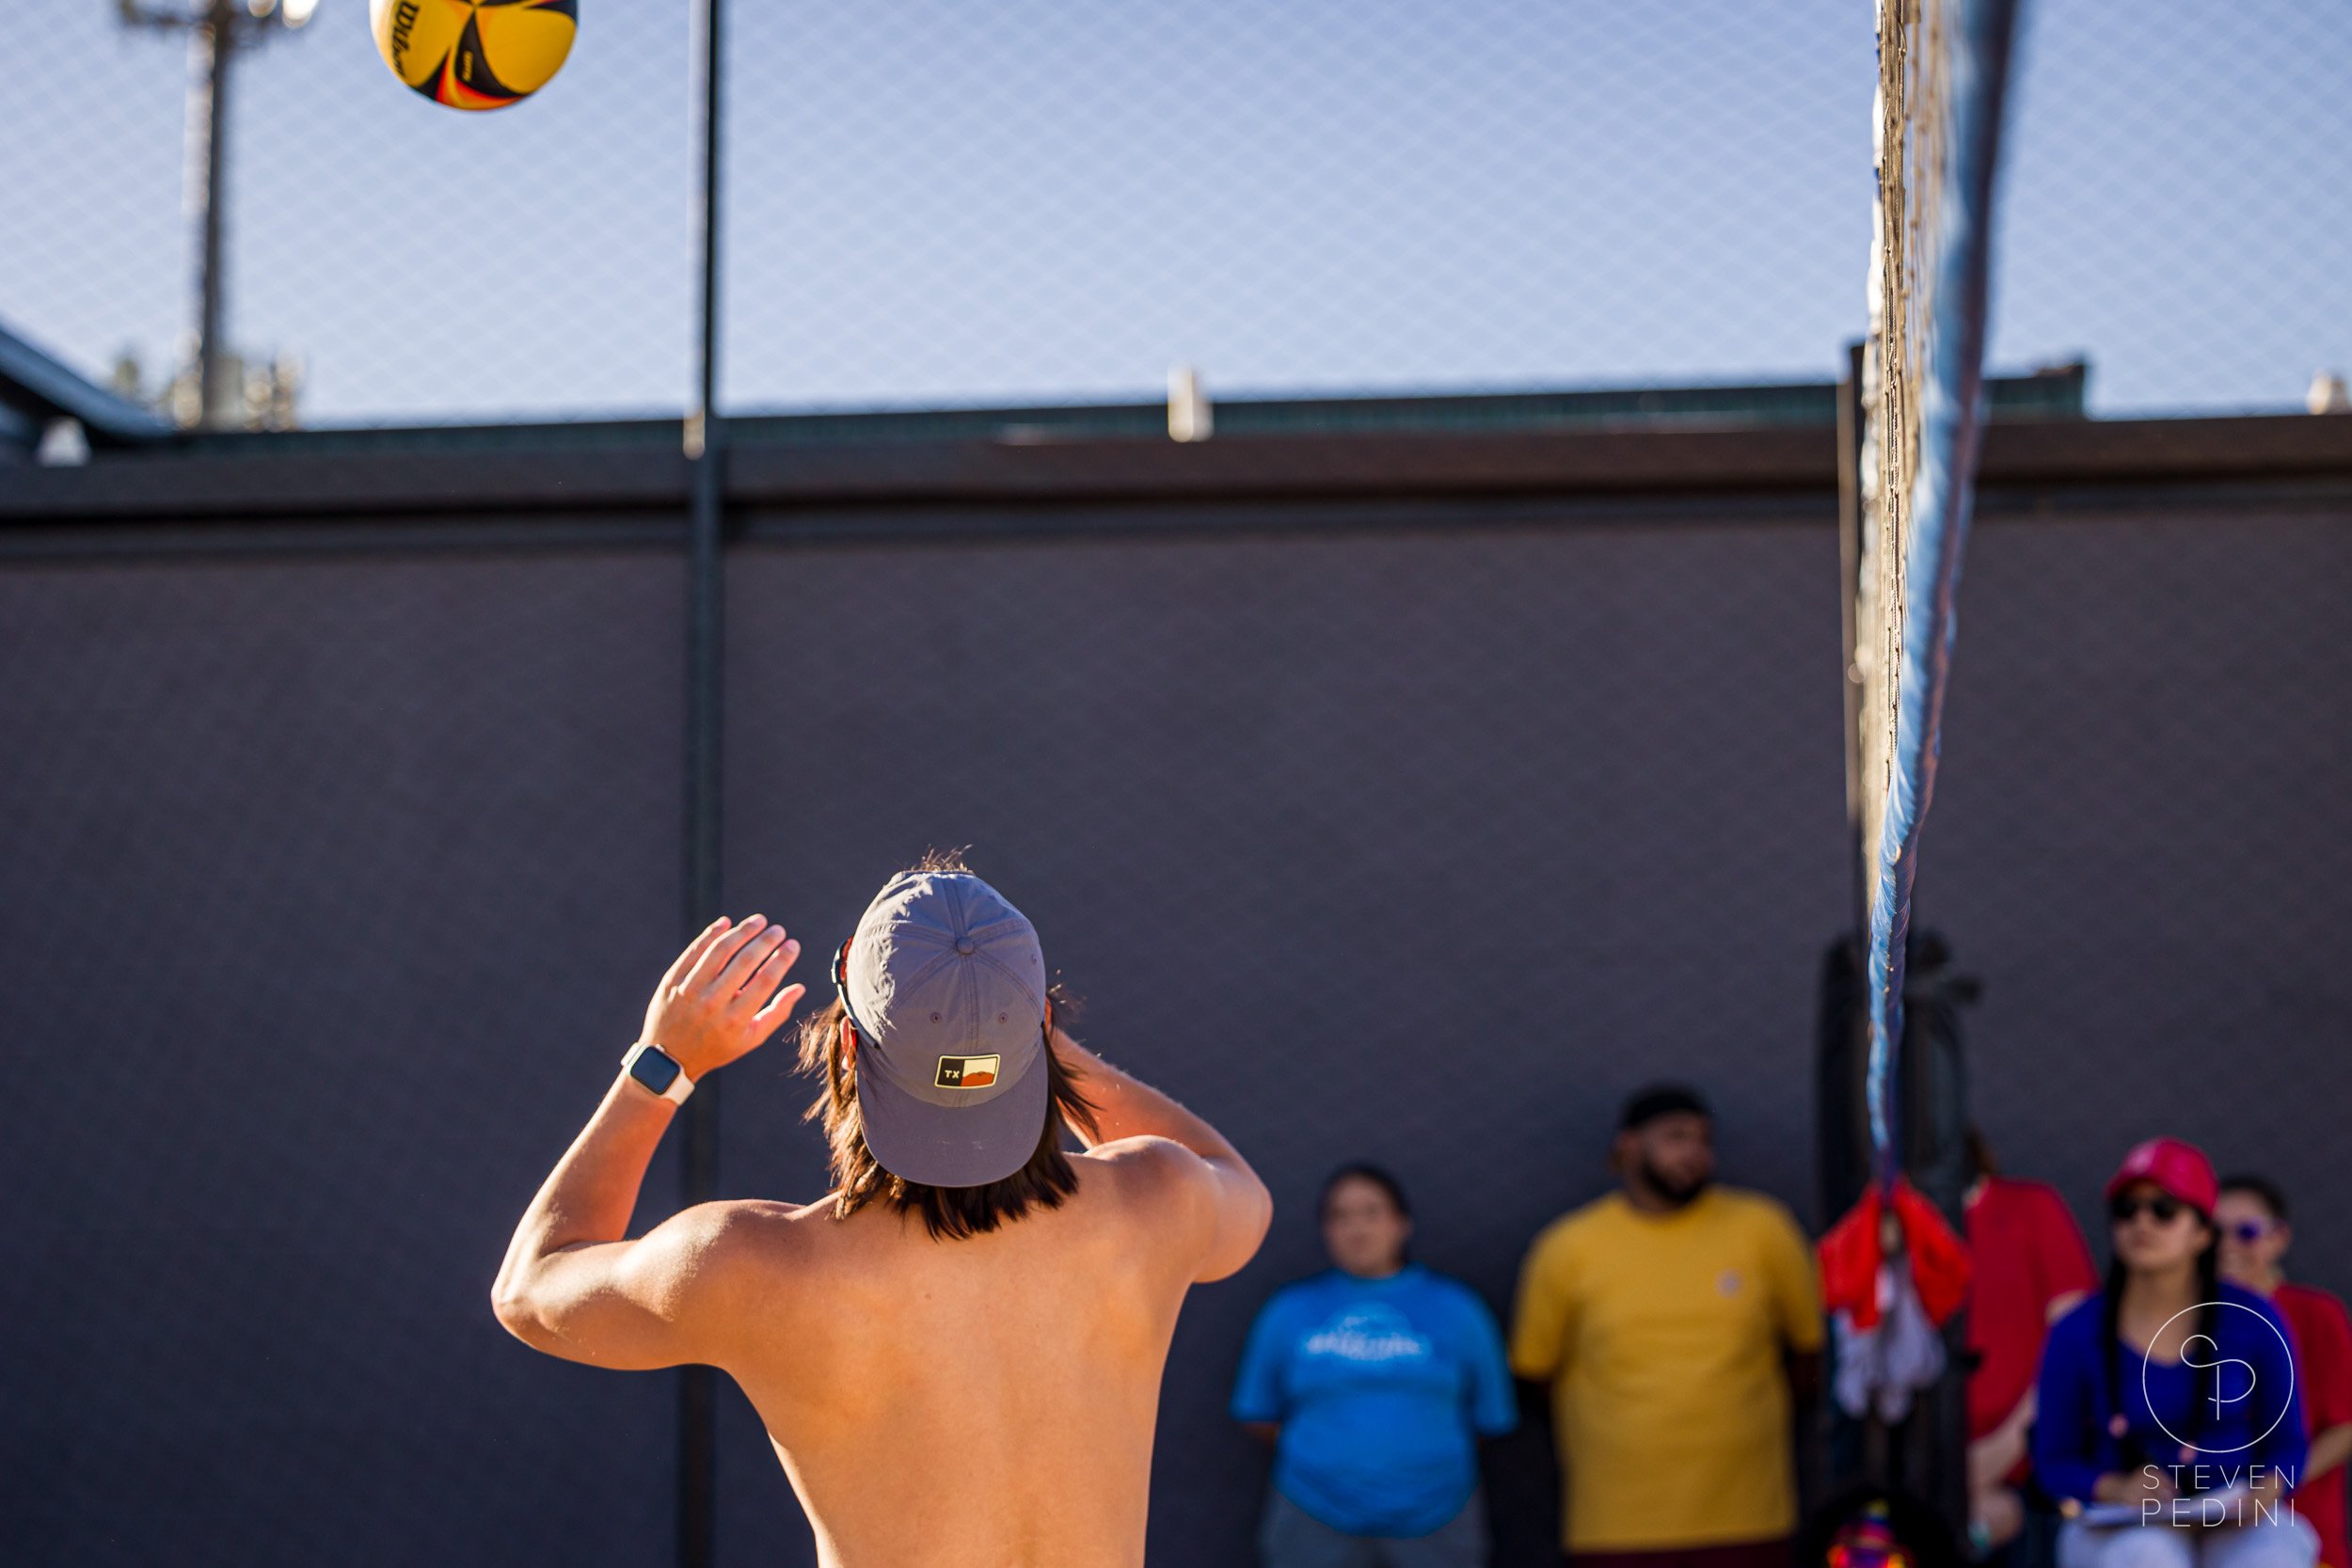 Steven Pedini Photography - Bumpy Pickle - Sand Volleyball - Houston TX - World Cup of Volleyball - 00067.jpg